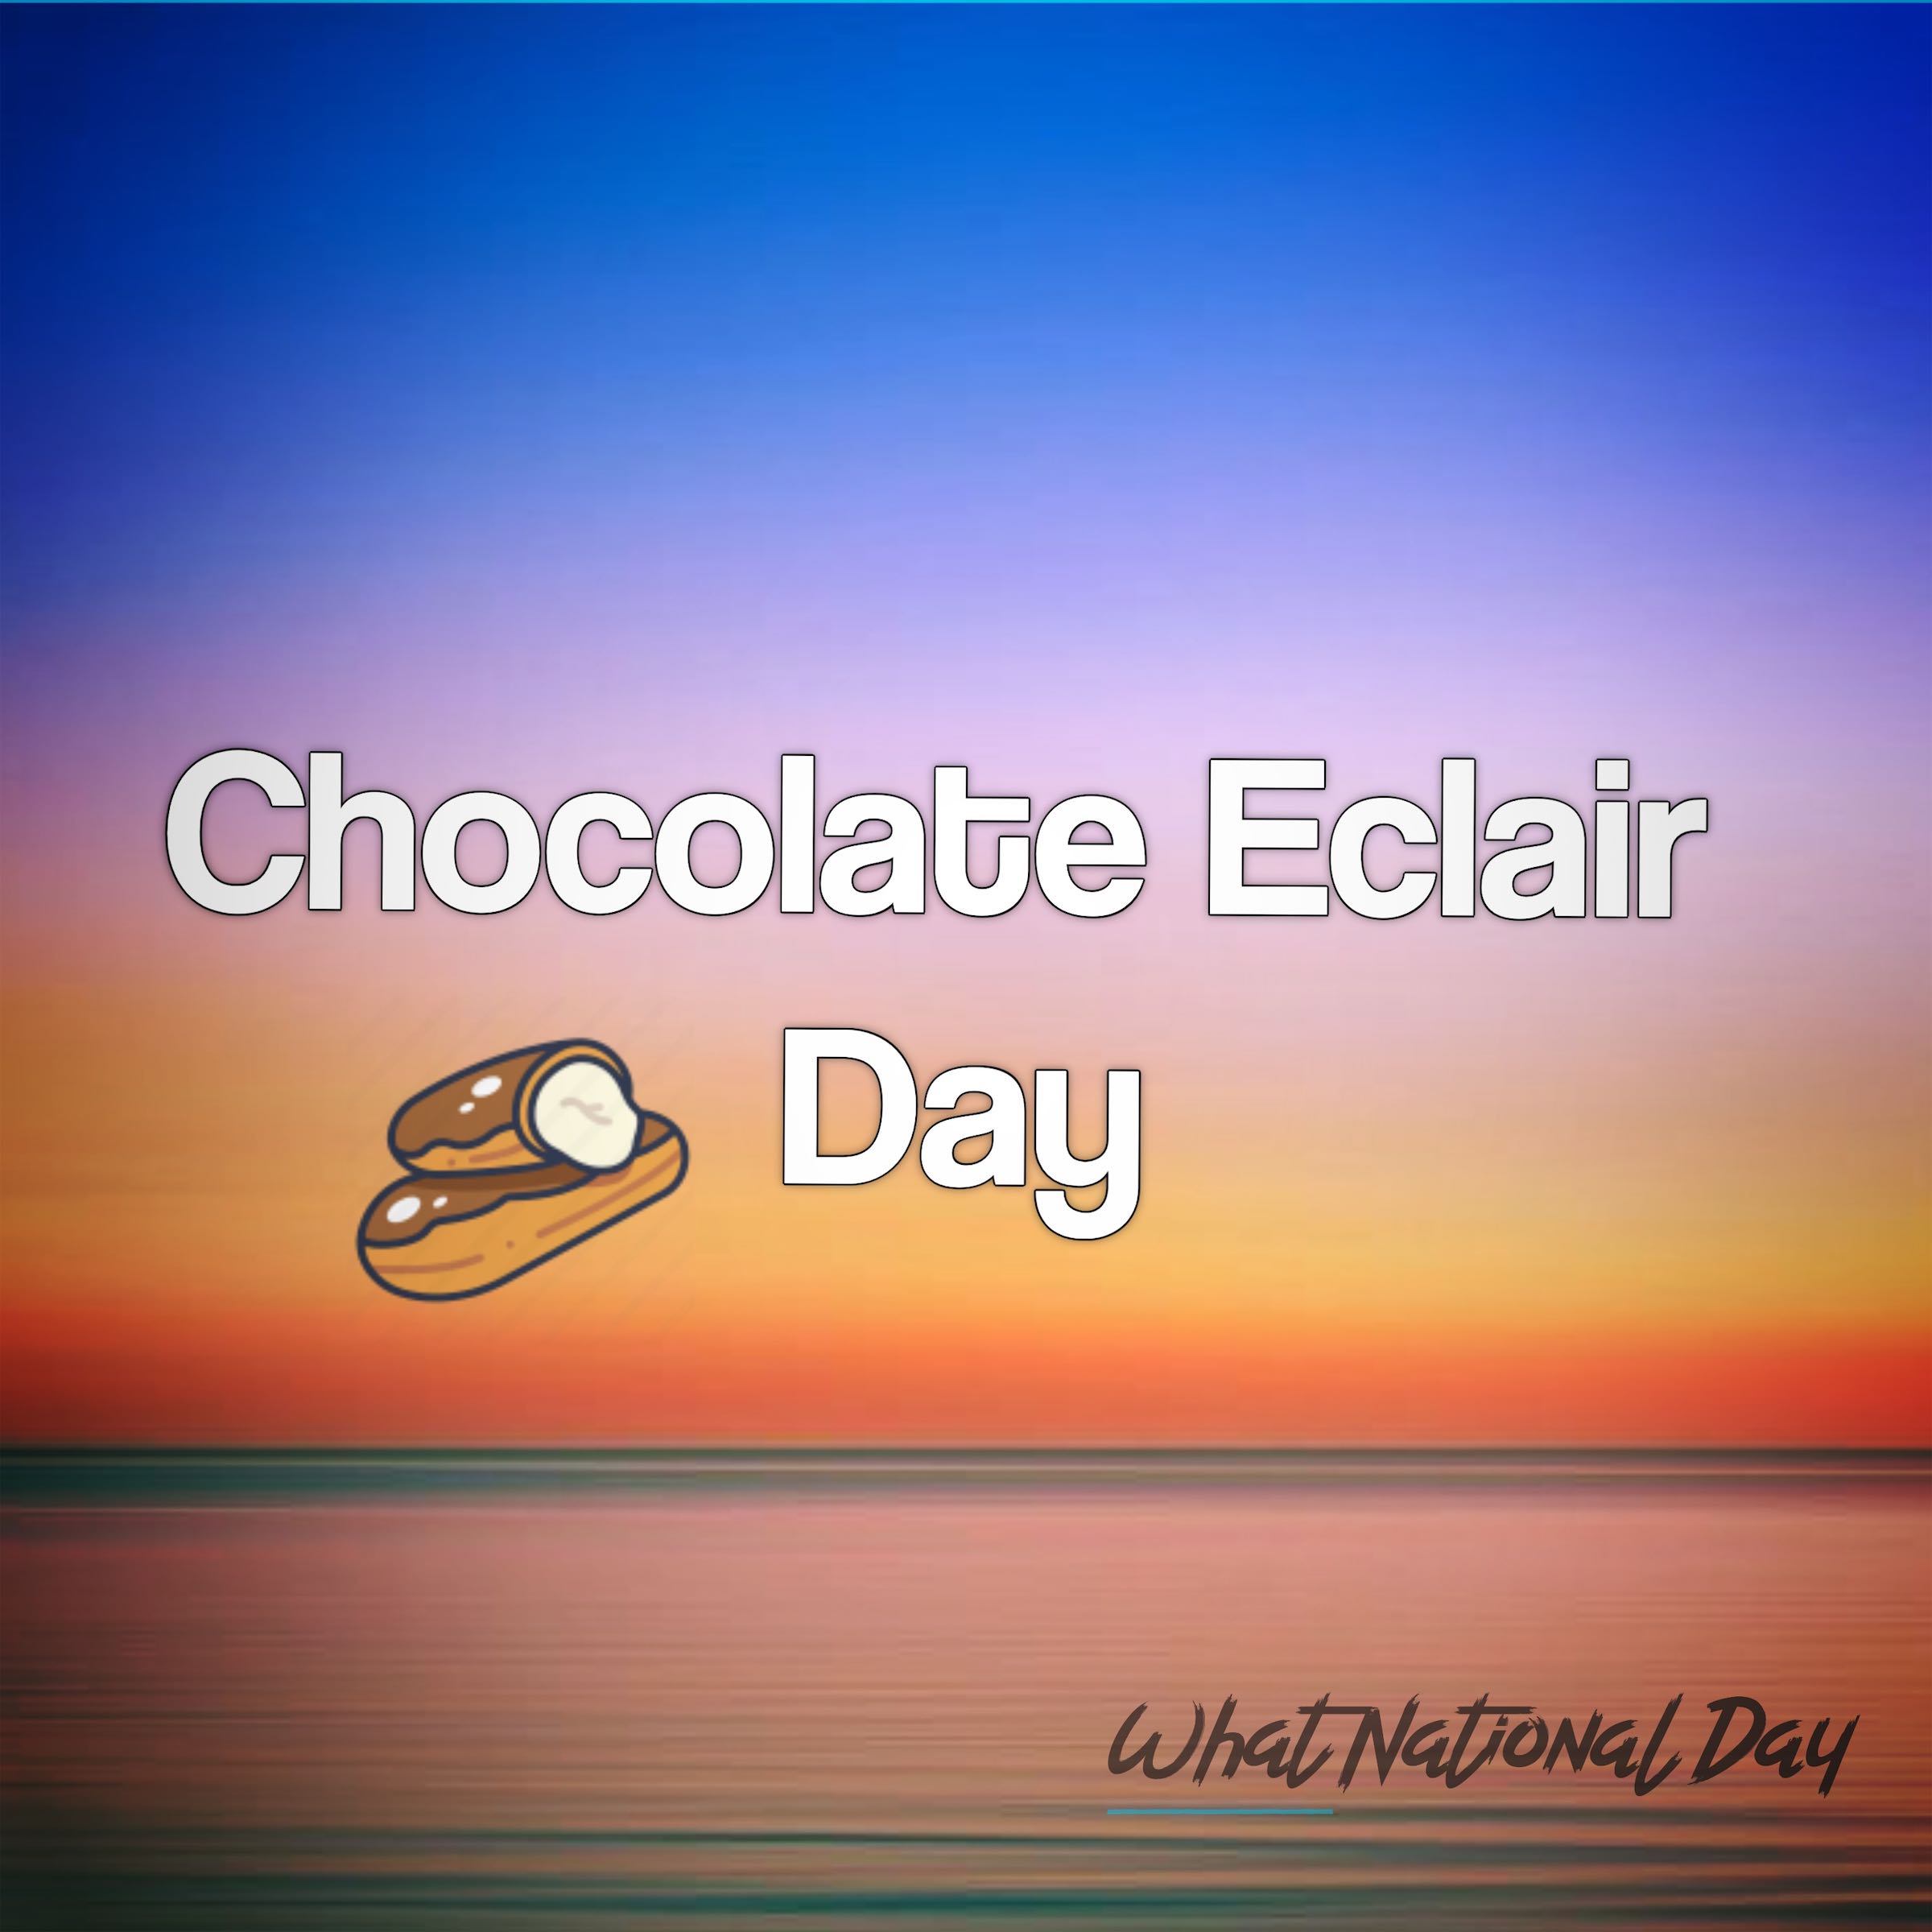 Chocolate Eclair Day